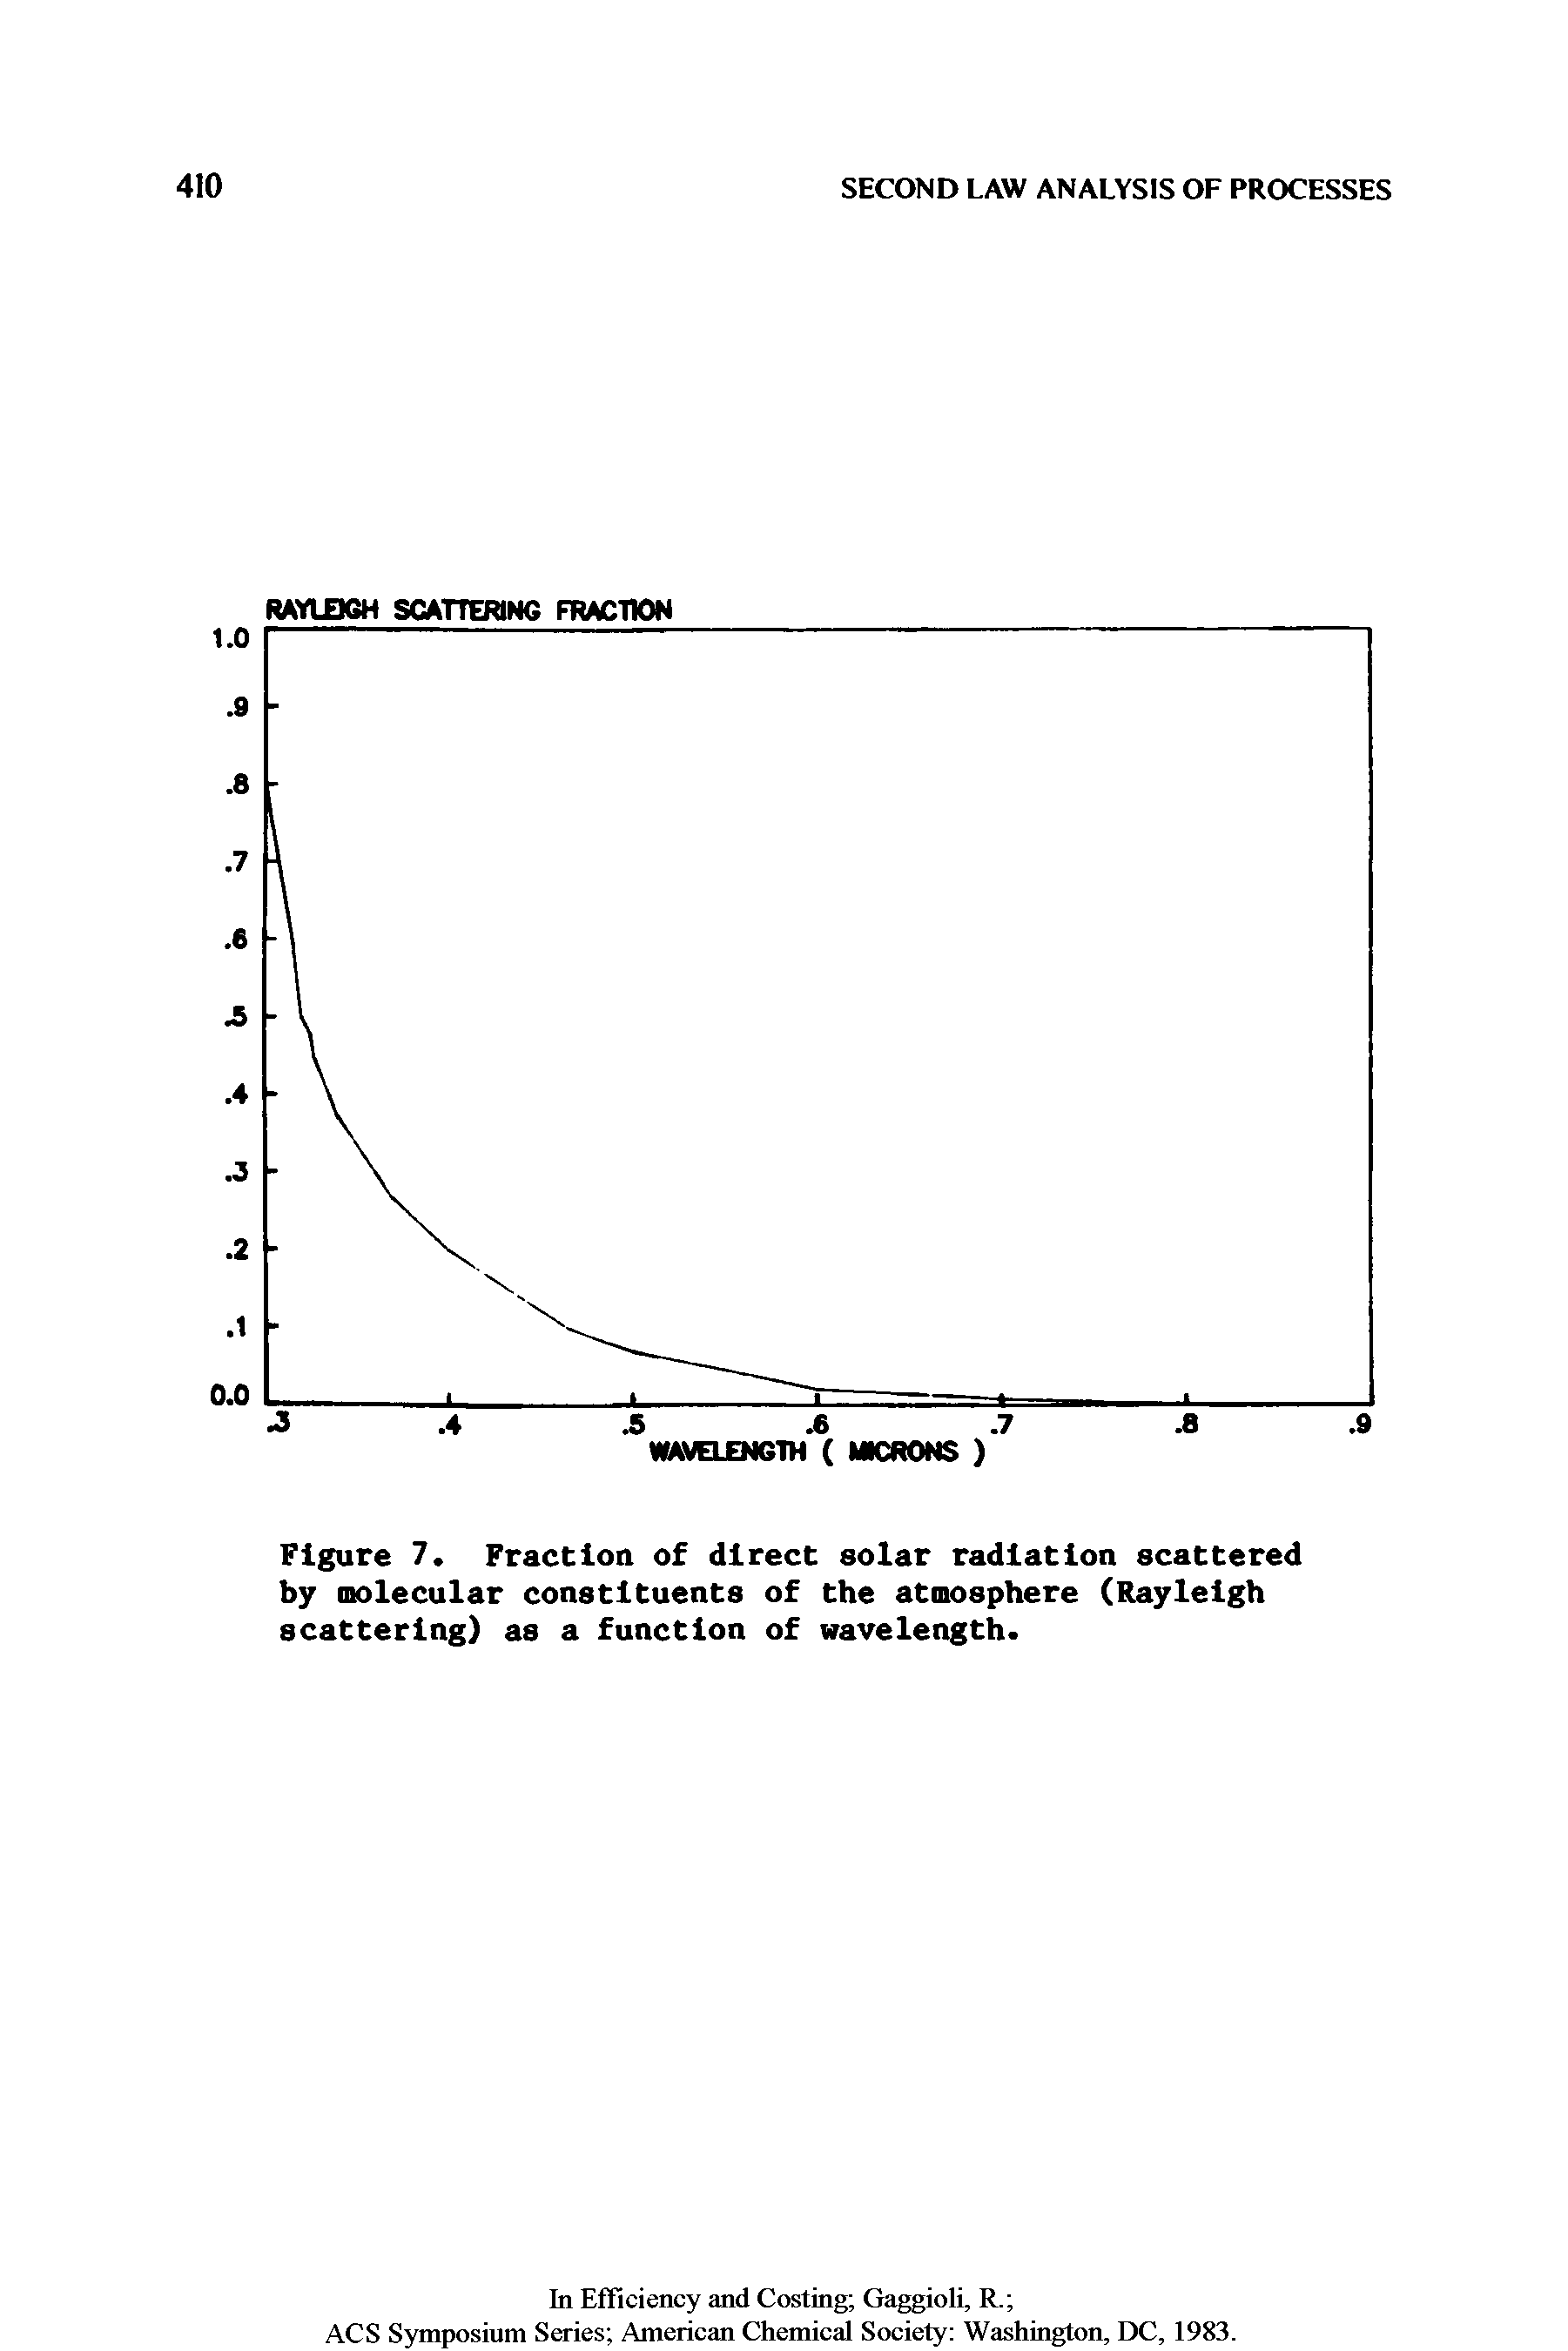 Figure 7. Fraction of direct solar radiation scattered by molecular constituents of the atmosphere (Rayleigh scattering) as a function of wavelength.